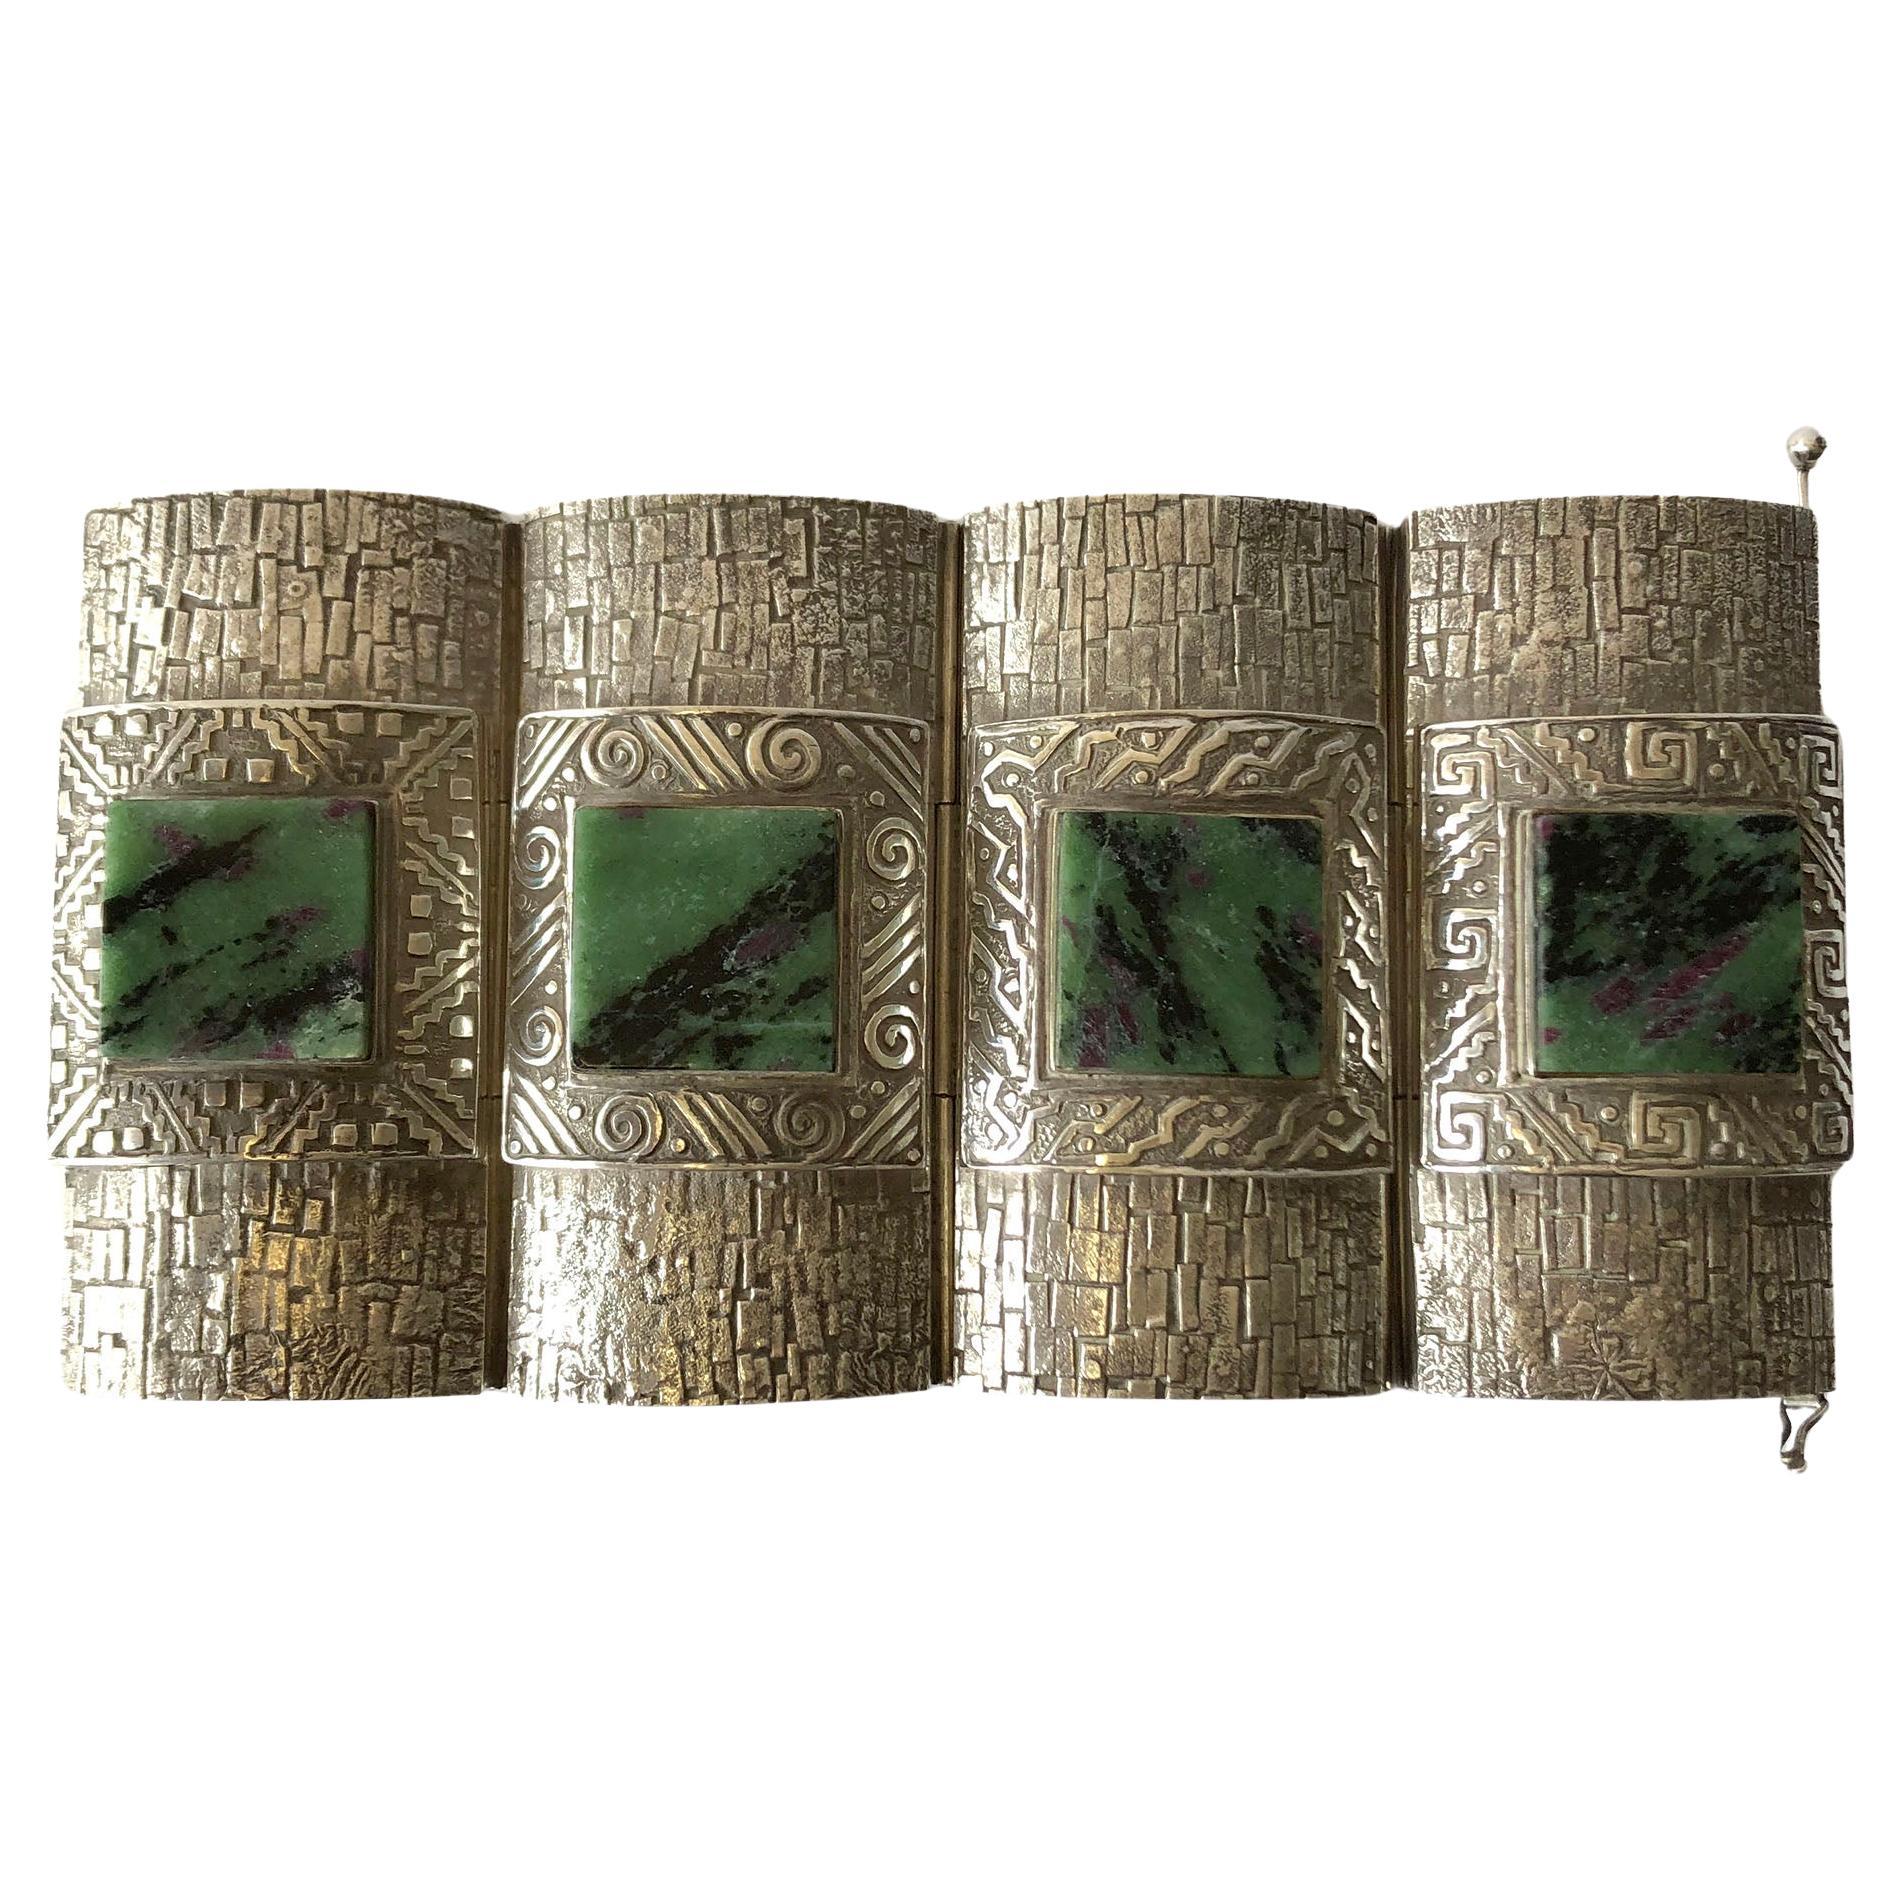 Important Aztec Peruvian modern sterling silver and green quartz linked cuff bracelet by Graziella Laffi circa 1965.  Bracelet consists of four panels of etched sterling silver, each one patterned differently from the next and holding a 1